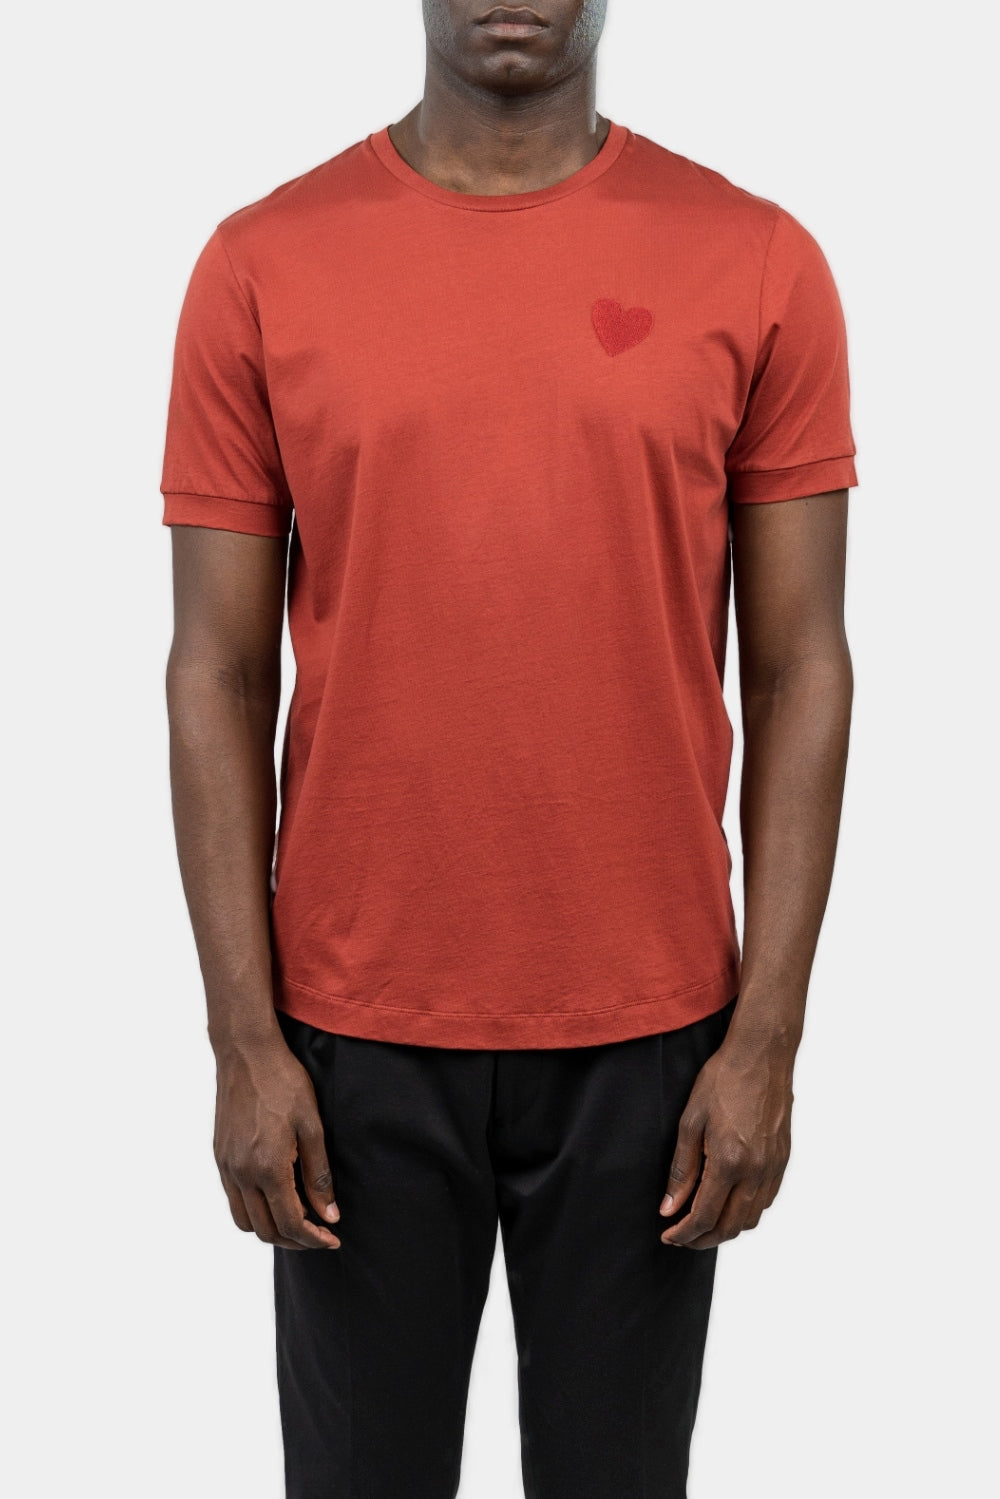 Classic Embroidery Heart Baked Clay T-shirt